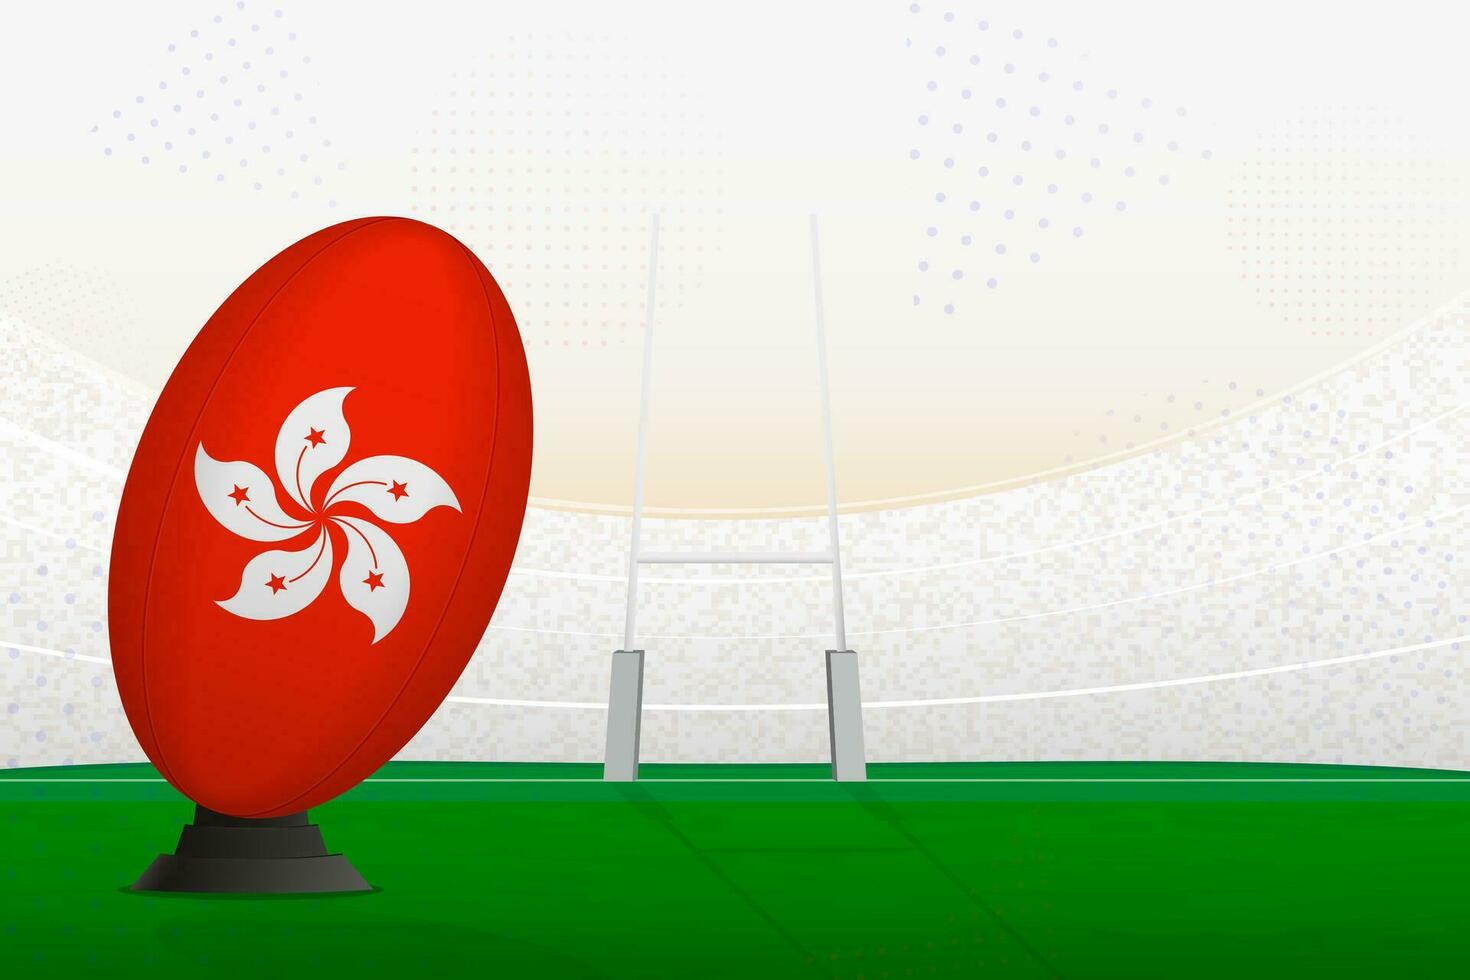 Hong Kong national team rugby ball on rugby stadium and goal posts, preparing for a penalty or free kick. vector